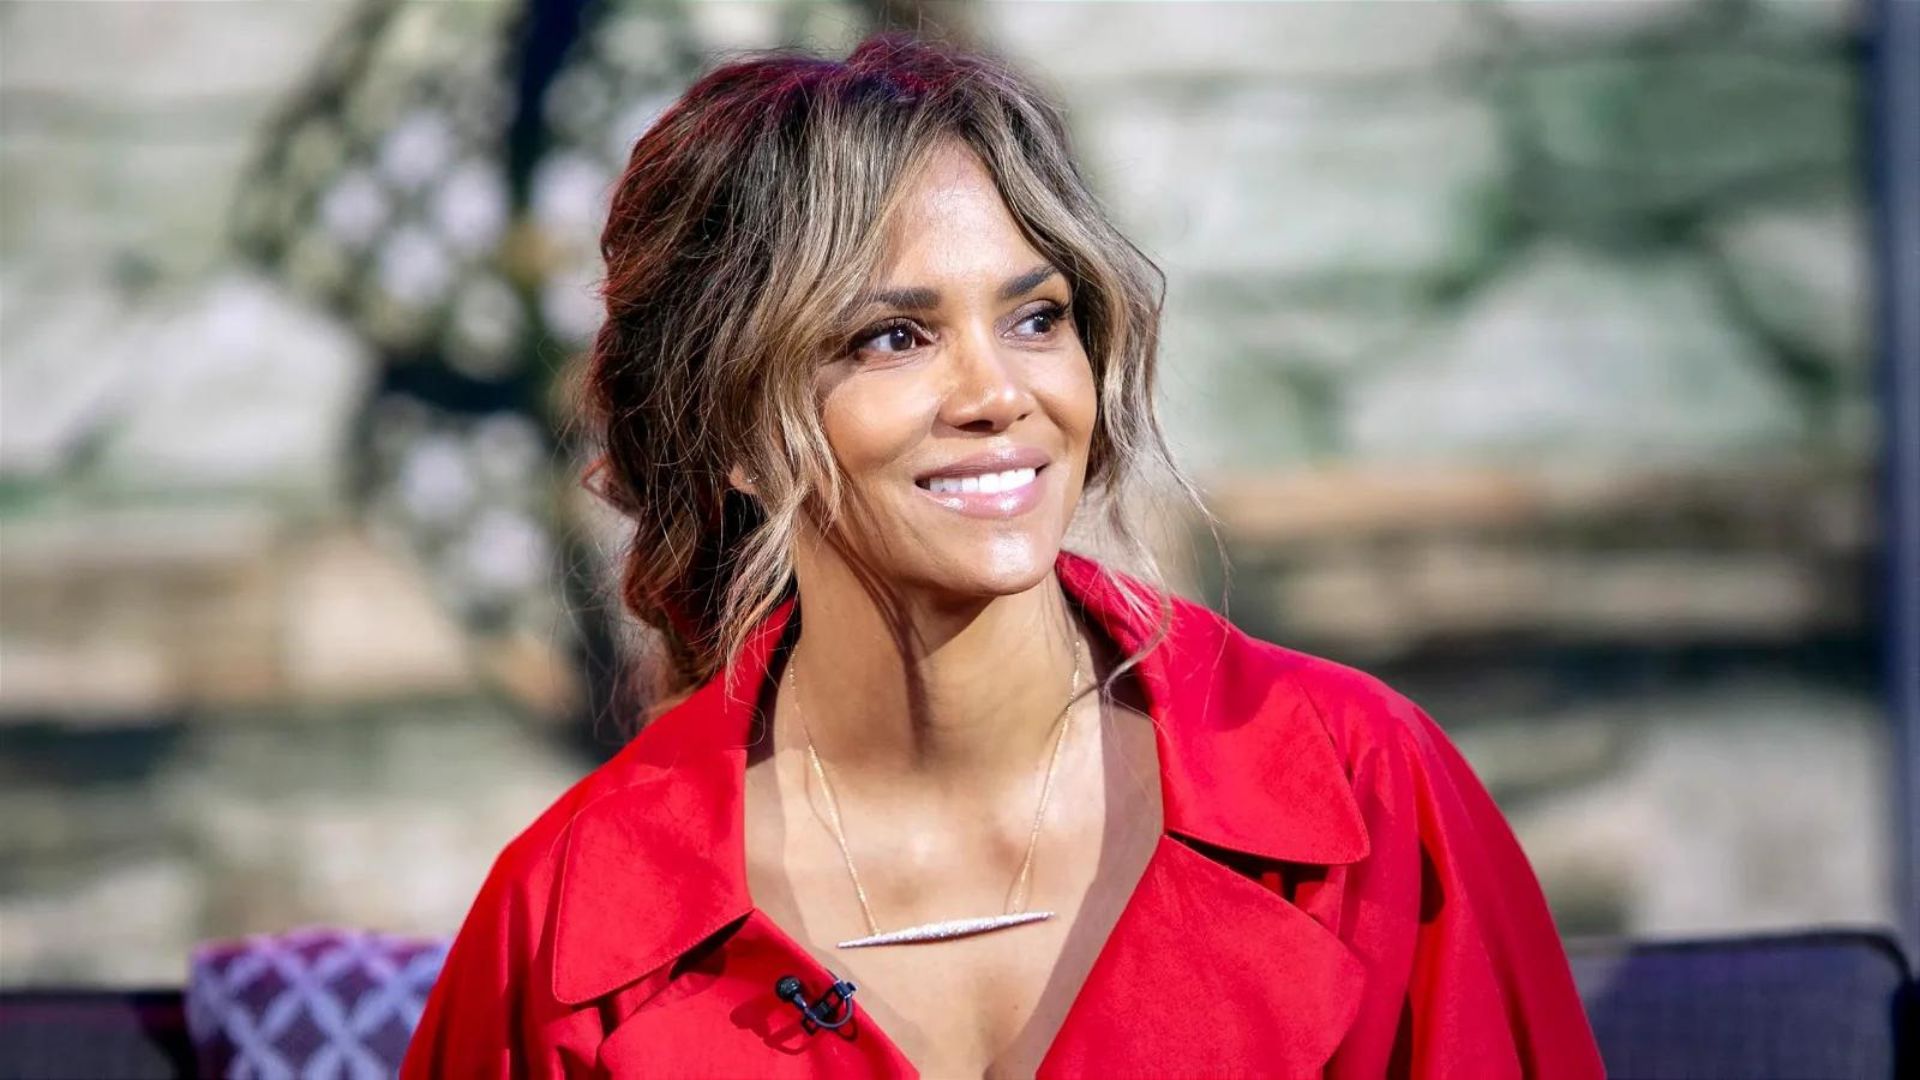 Halle Berry Wearing A Red Dress